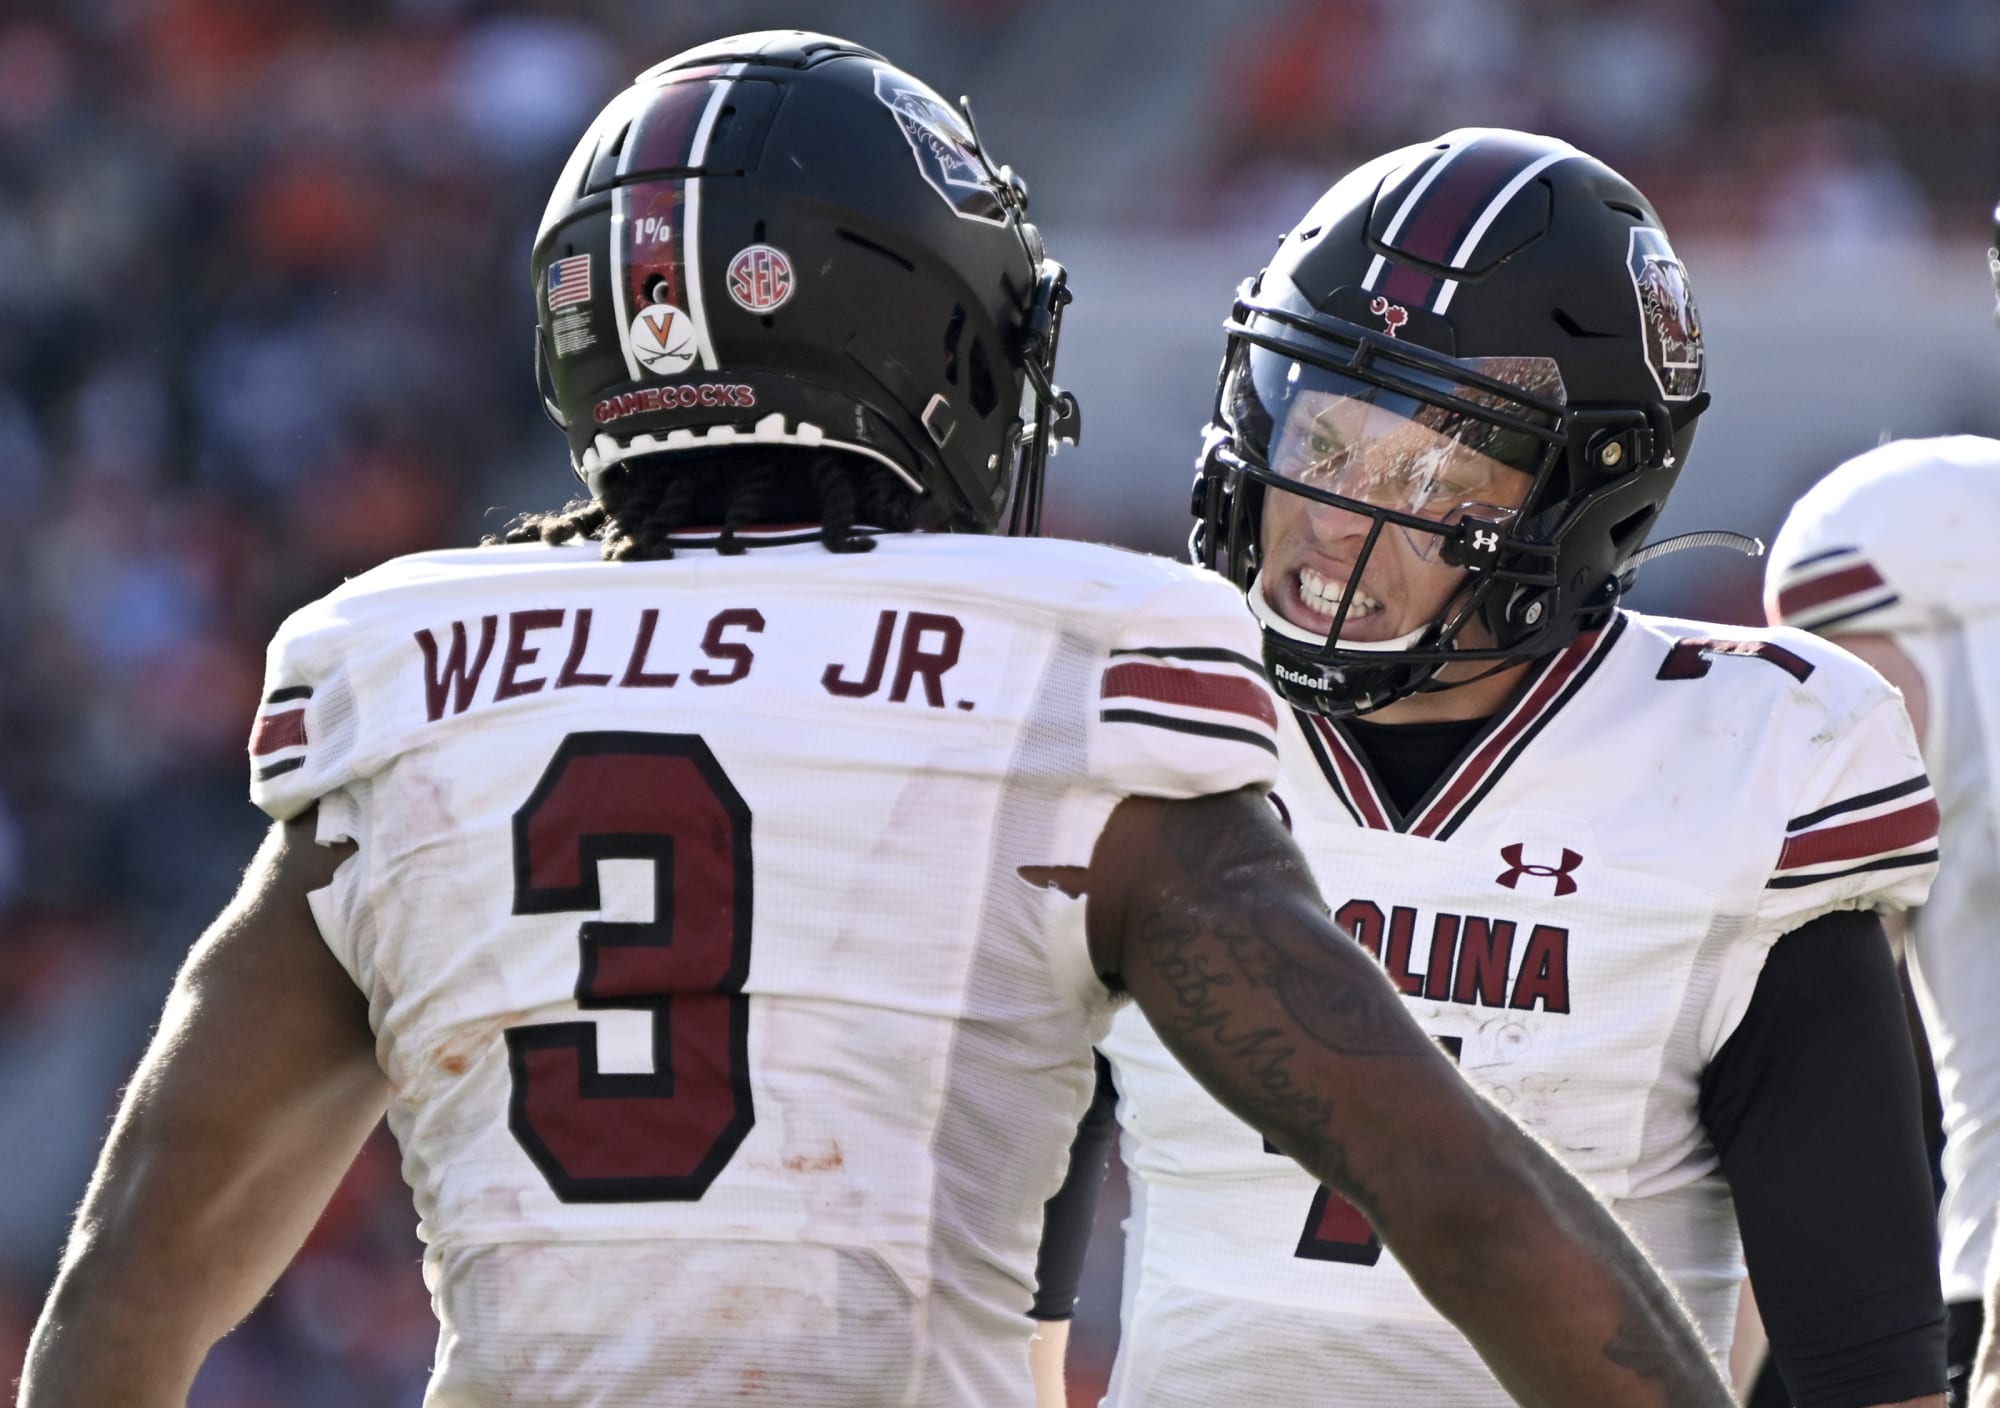 National site puts Gamecocks on top-100 players list